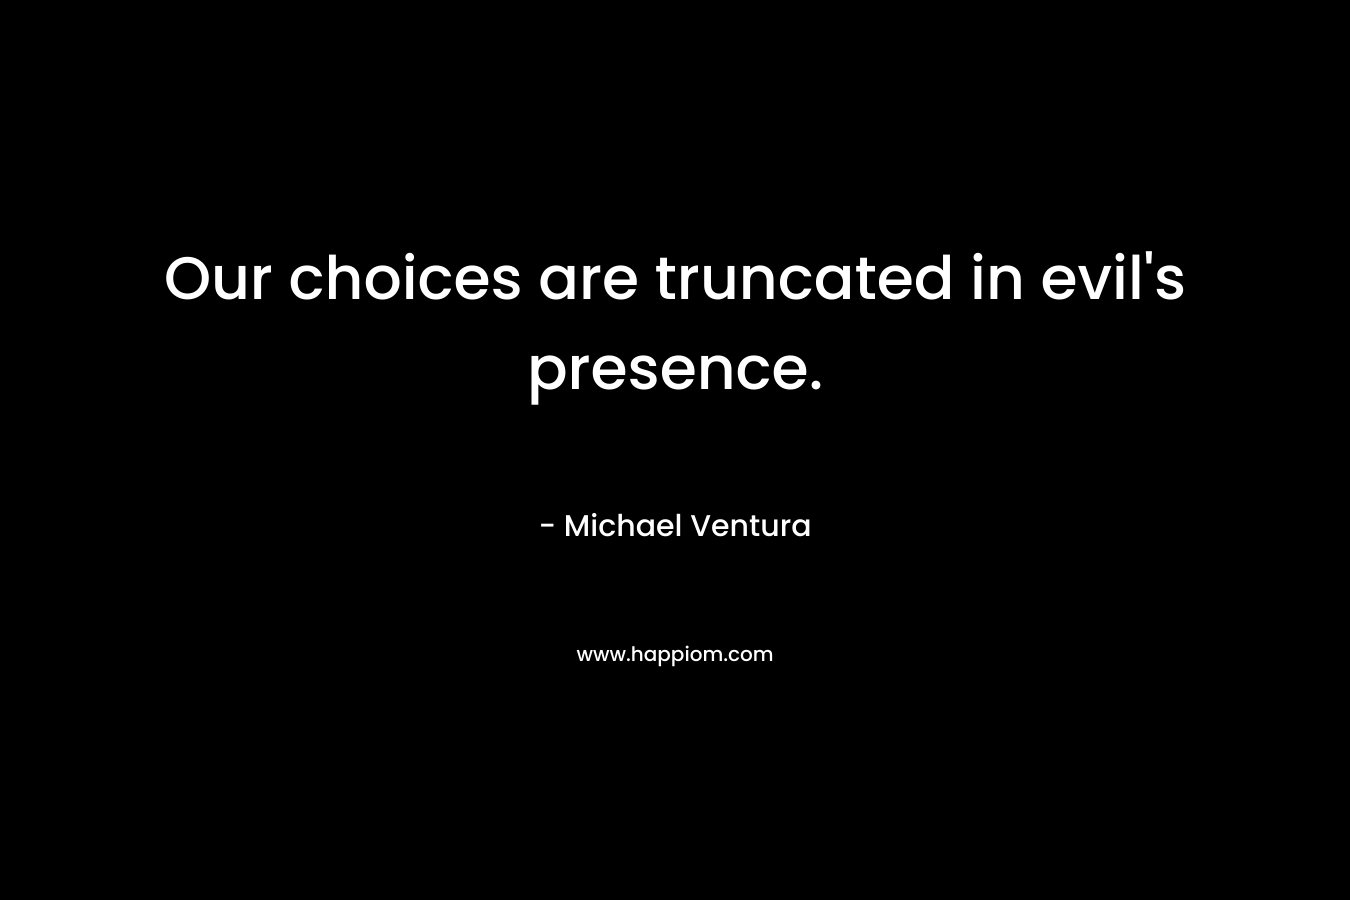 Our choices are truncated in evil’s presence. – Michael Ventura